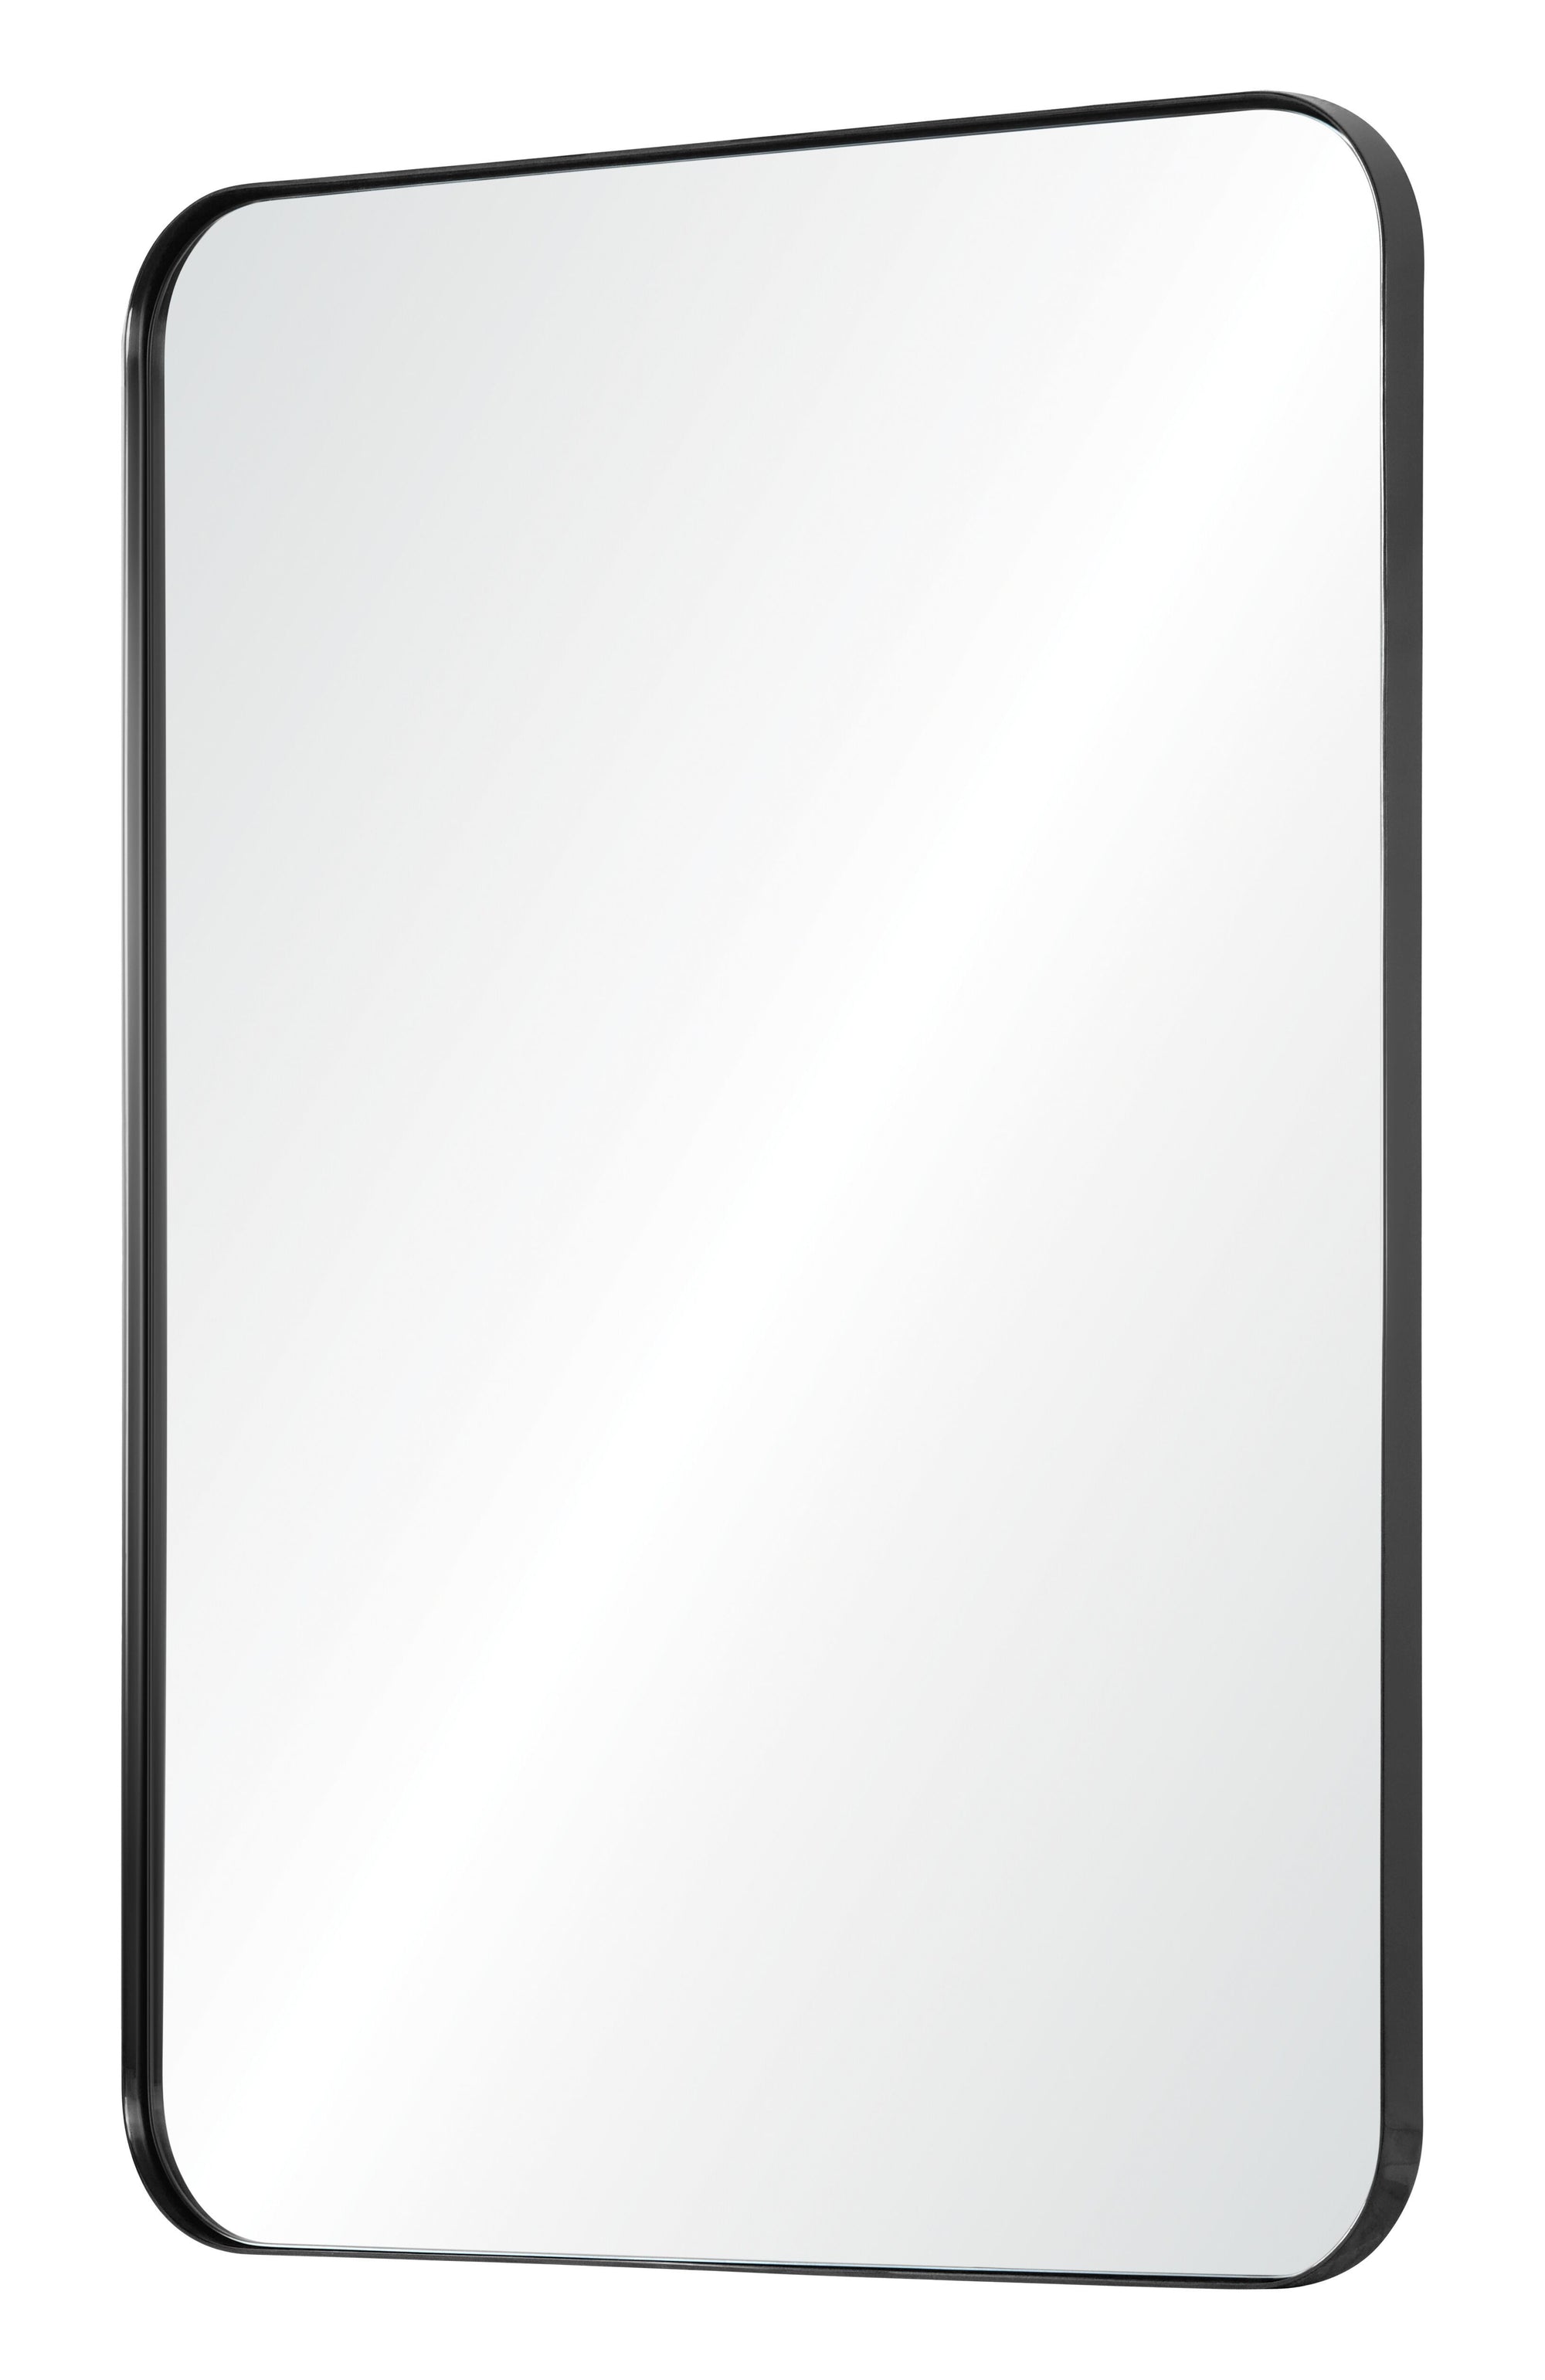 Black Nickel Large Wall Mirror by Mirror Image Home| Fig Linens